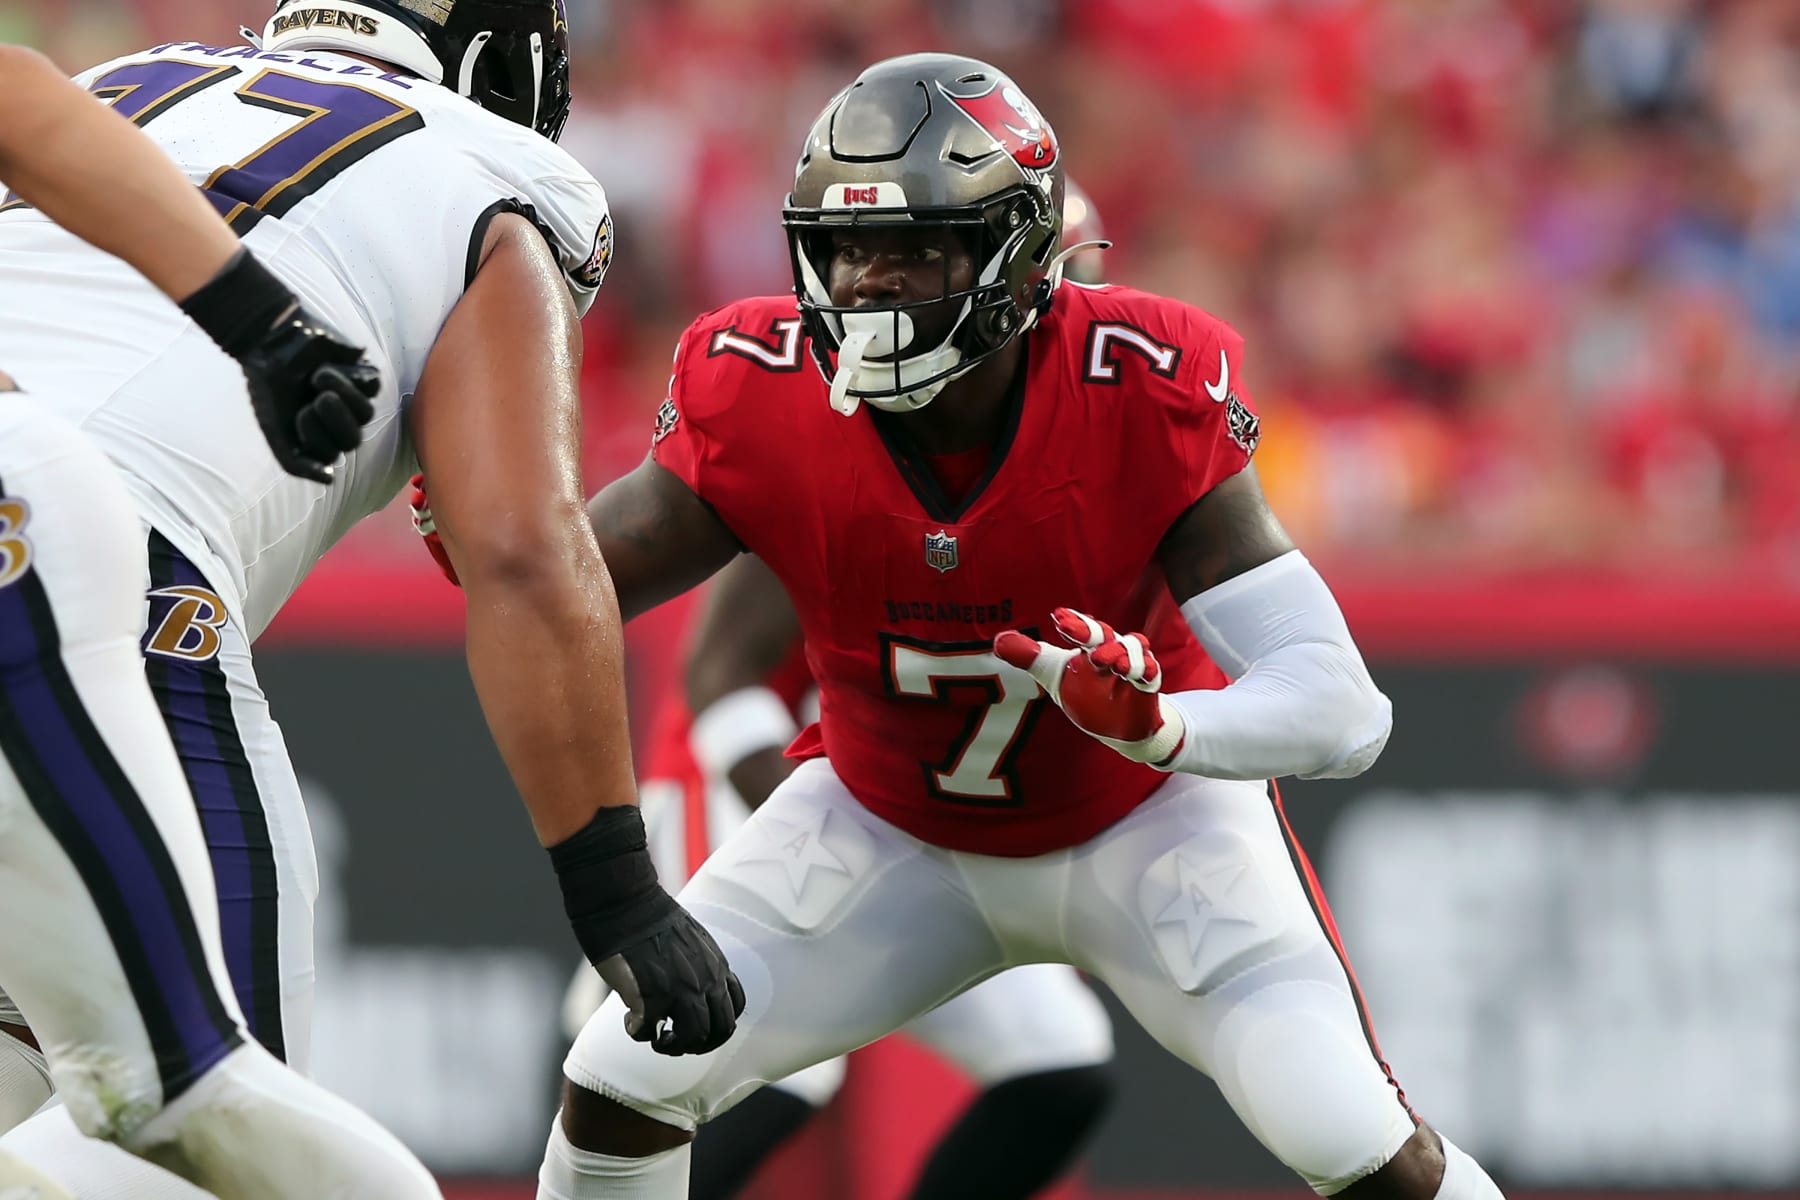 Keys To Cannon Fire: Tampa Bay Buccaneers at Buffalo Bills - Tampa